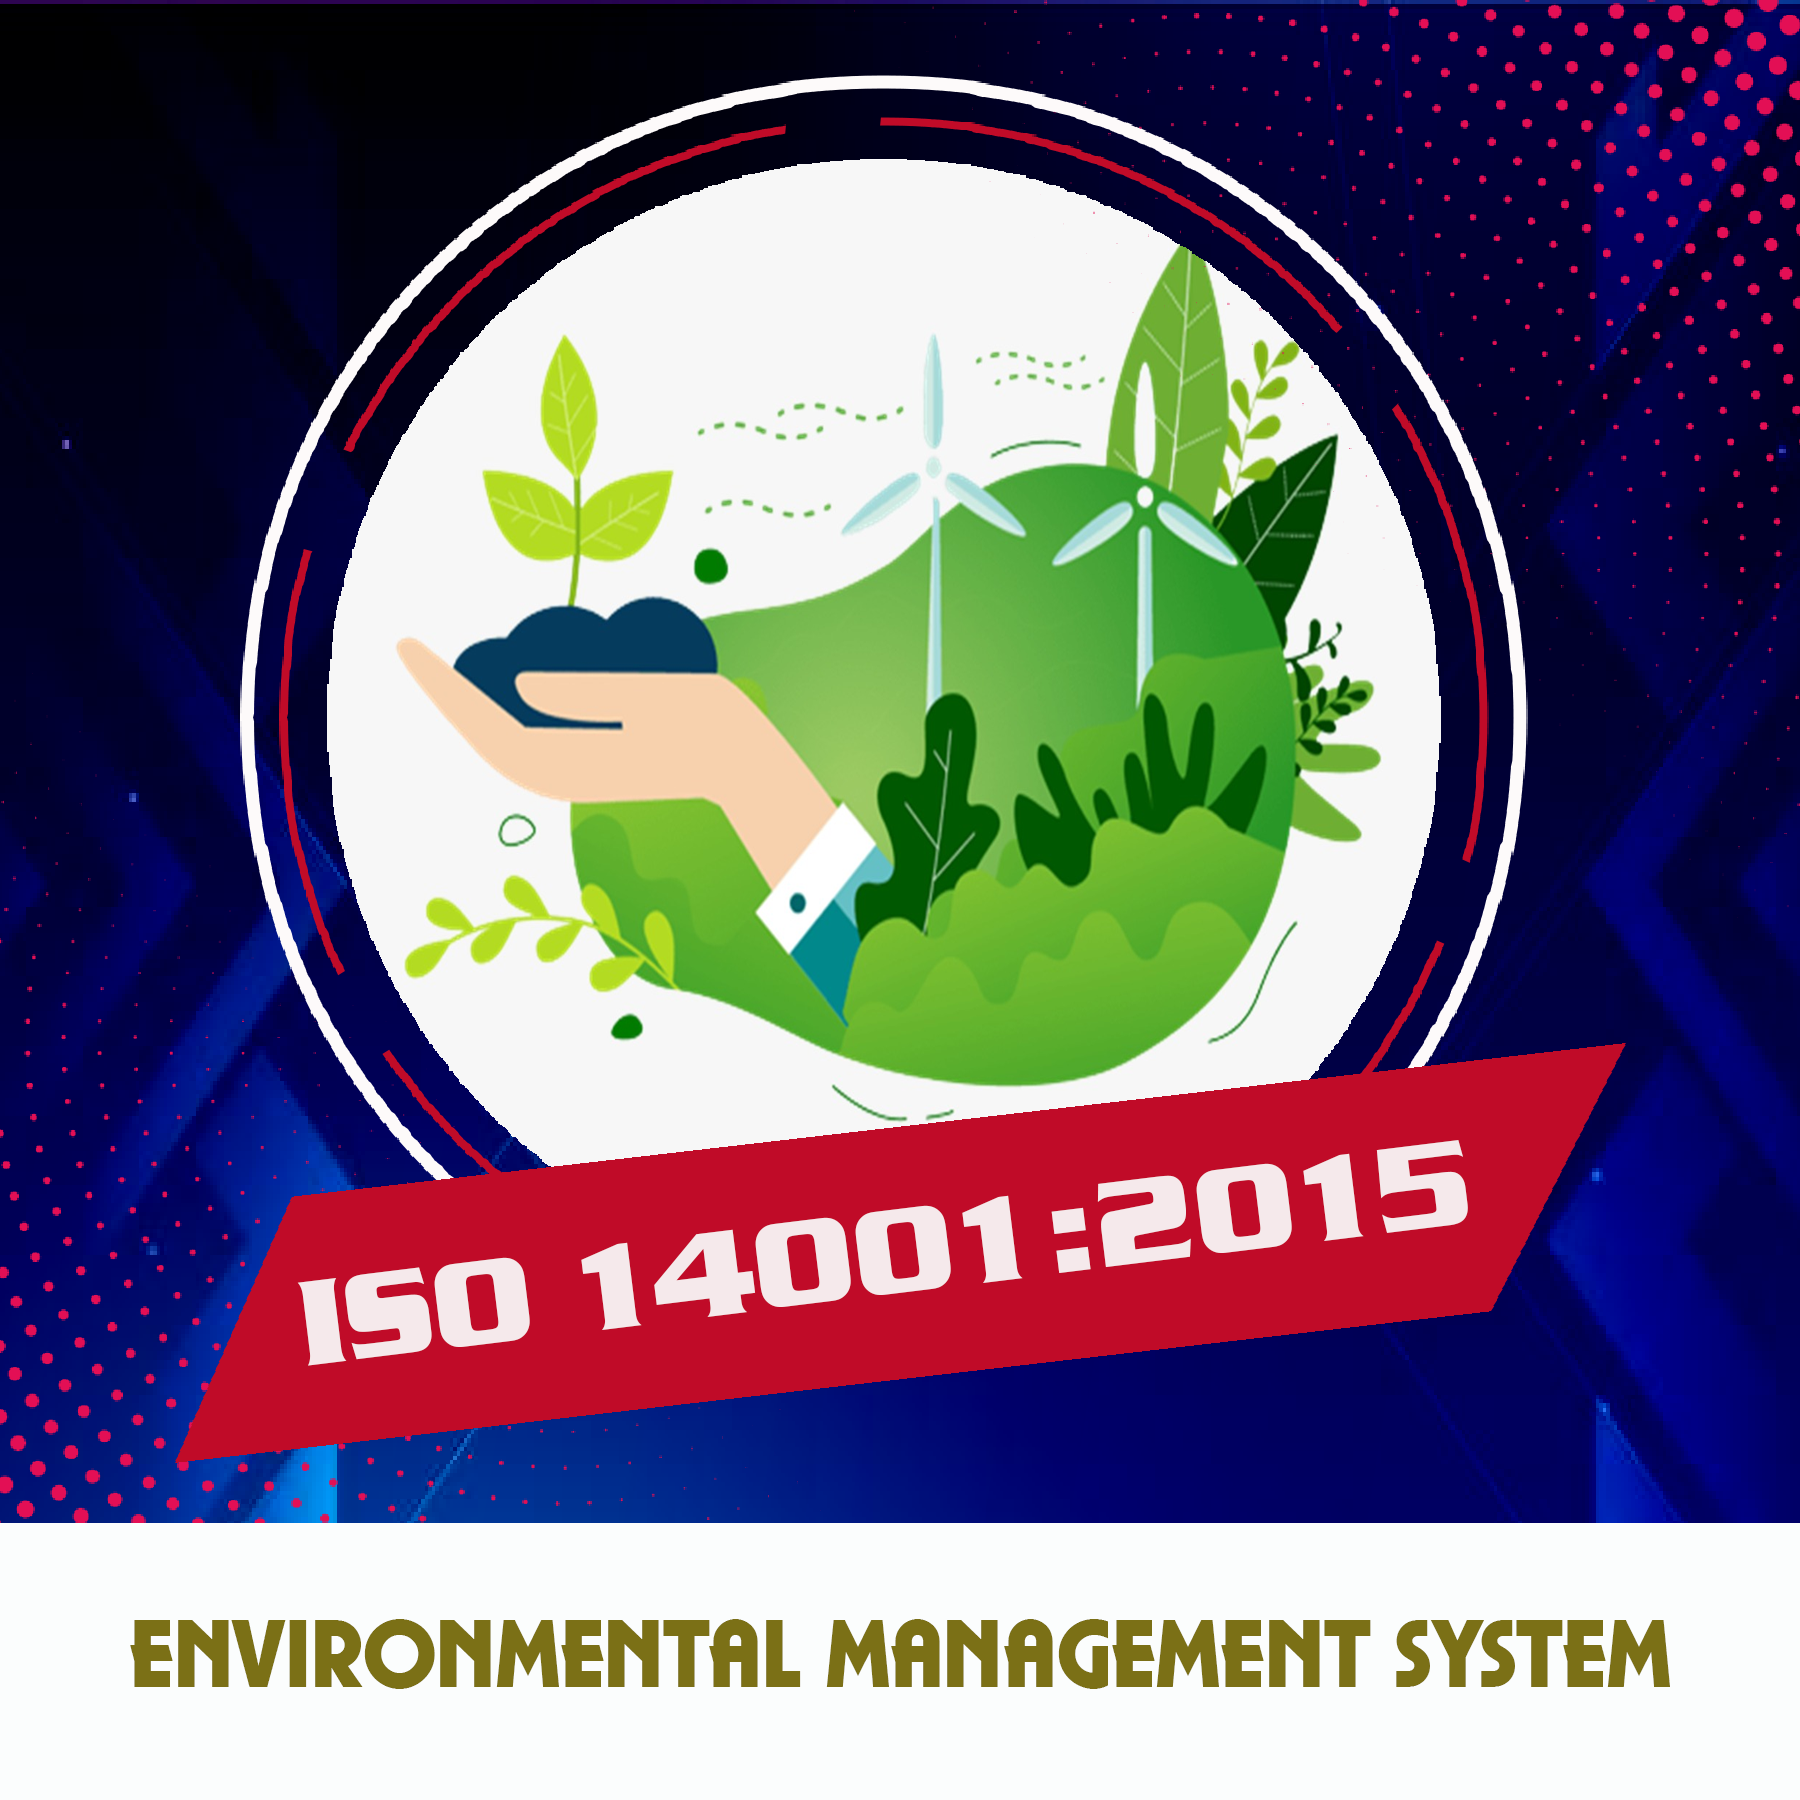 Environmental Management System Needs and Goals